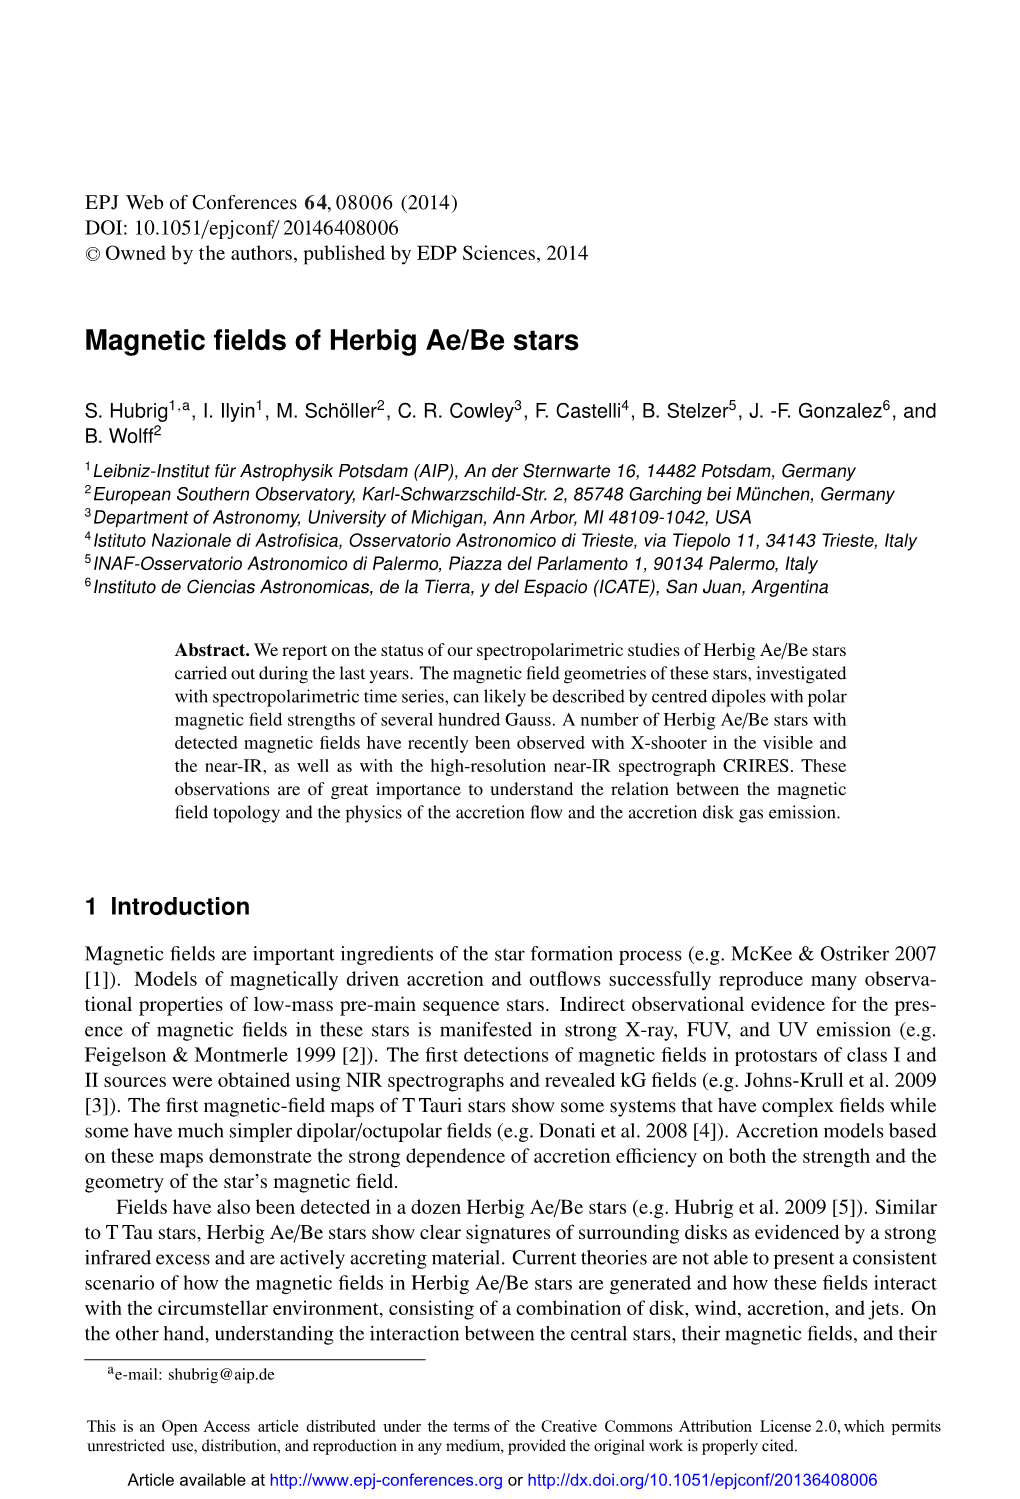 Magnetic Fields of Herbig Ae/Be Stars